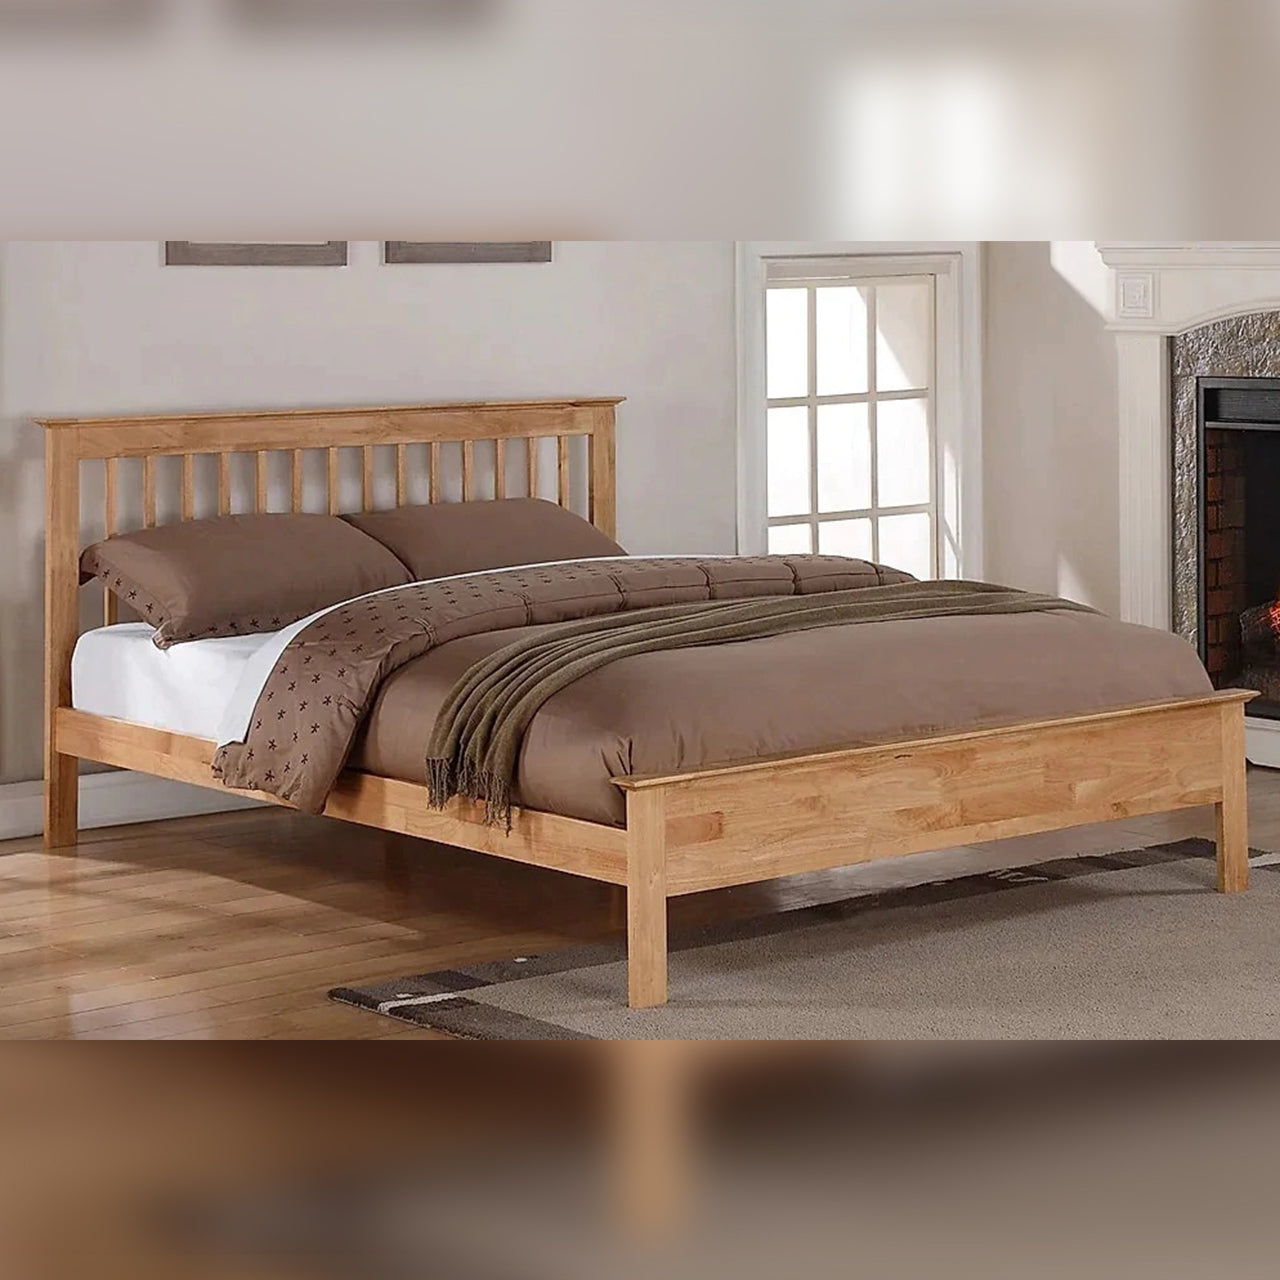 Single Bed Wooden Single Bed